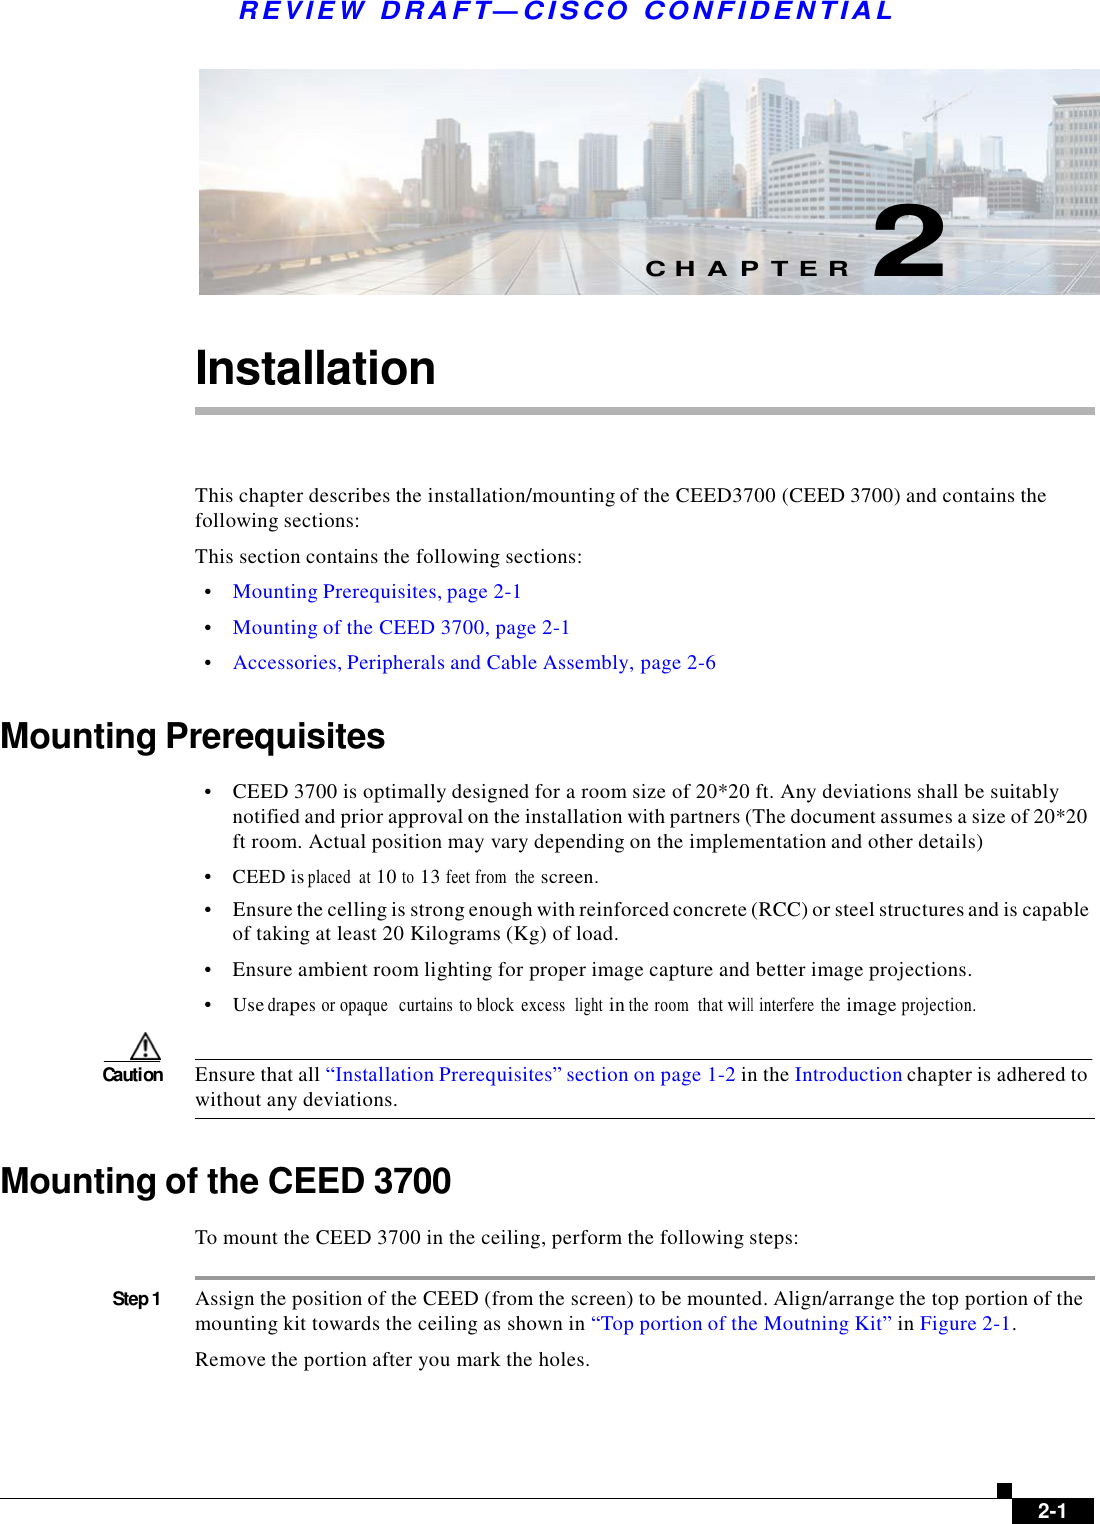  R E V I E W  DR AFT — CISC O  C O NF IDE N TIAL          C H A P T E R  2   Installation     This chapter describes the installation/mounting of the CEED3700 (CEED 3700) and contains the following sections: This section contains the following sections:  •    Mounting Prerequisites, page 2-1  •    Mounting of the CEED 3700, page 2-1  •    Accessories, Peripherals and Cable Assembly, page 2-6   Mounting Prerequisites  •    CEED 3700 is optimally designed for a room size of 20*20 ft. Any deviations shall be suitably notified and prior approval on the installation with partners (The document assumes a size of 20*20 ft room. Actual position may vary depending on the implementation and other details)  •    CEED is placed  at 10 to 13 feet from  the screen. •    Ensure the celling is strong enough with reinforced concrete (RCC) or steel structures and is capable of taking at least 20 Kilograms (Kg) of load.  •    Ensure ambient room lighting for proper image capture and better image projections.  •    Use drapes or opaque   curtains  to block  excess  light in the room  that will interfere  the image projection.   Caution  Ensure that all “Installation Prerequisites” section on page 1-2 in the Introduction chapter is adhered to without any deviations.   Mounting of the CEED 3700  To mount the CEED 3700 in the ceiling, perform the following steps:   Step 1  Assign the position of the CEED (from the screen) to be mounted. Align/arrange the top portion of the mounting kit towards the ceiling as shown in “Top portion of the Moutning Kit” in Figure 2-1.  Remove the portion after you mark the holes.          2-1 